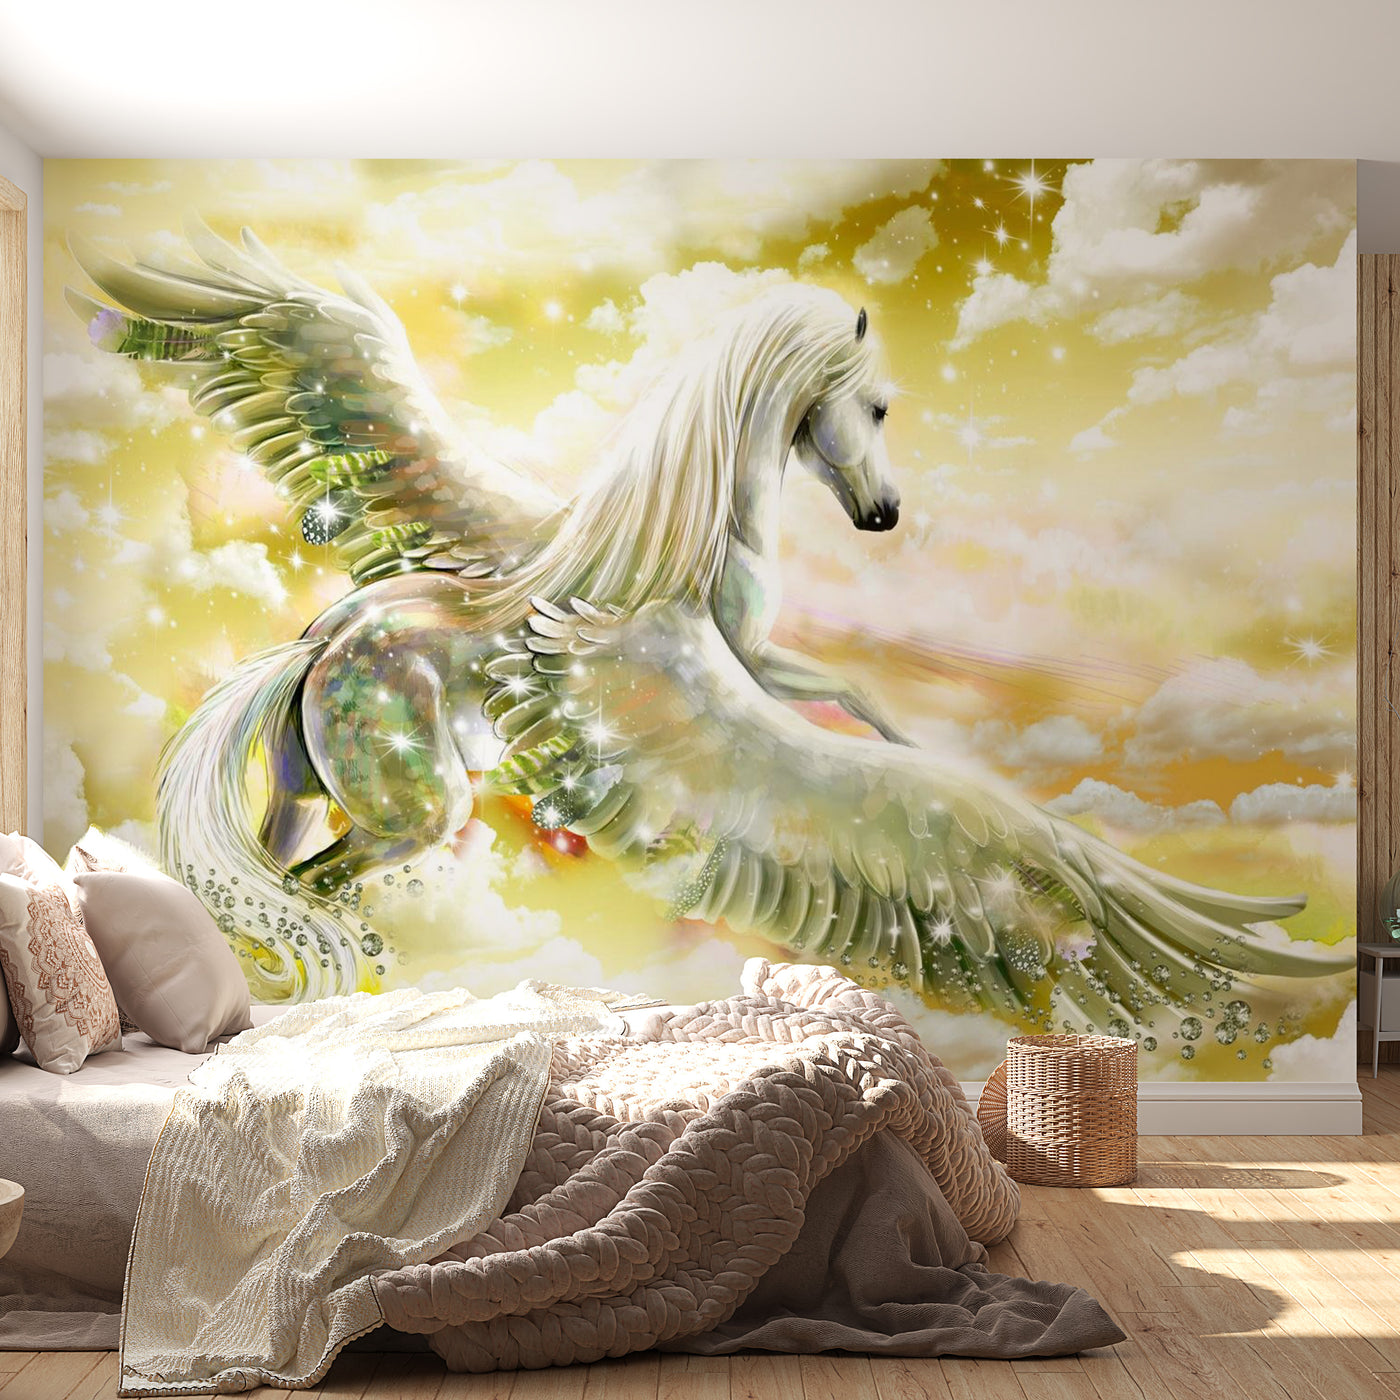 Peel & Stick Fantasy Wall Mural - Pegasus Yellow - Removable Wall Decals